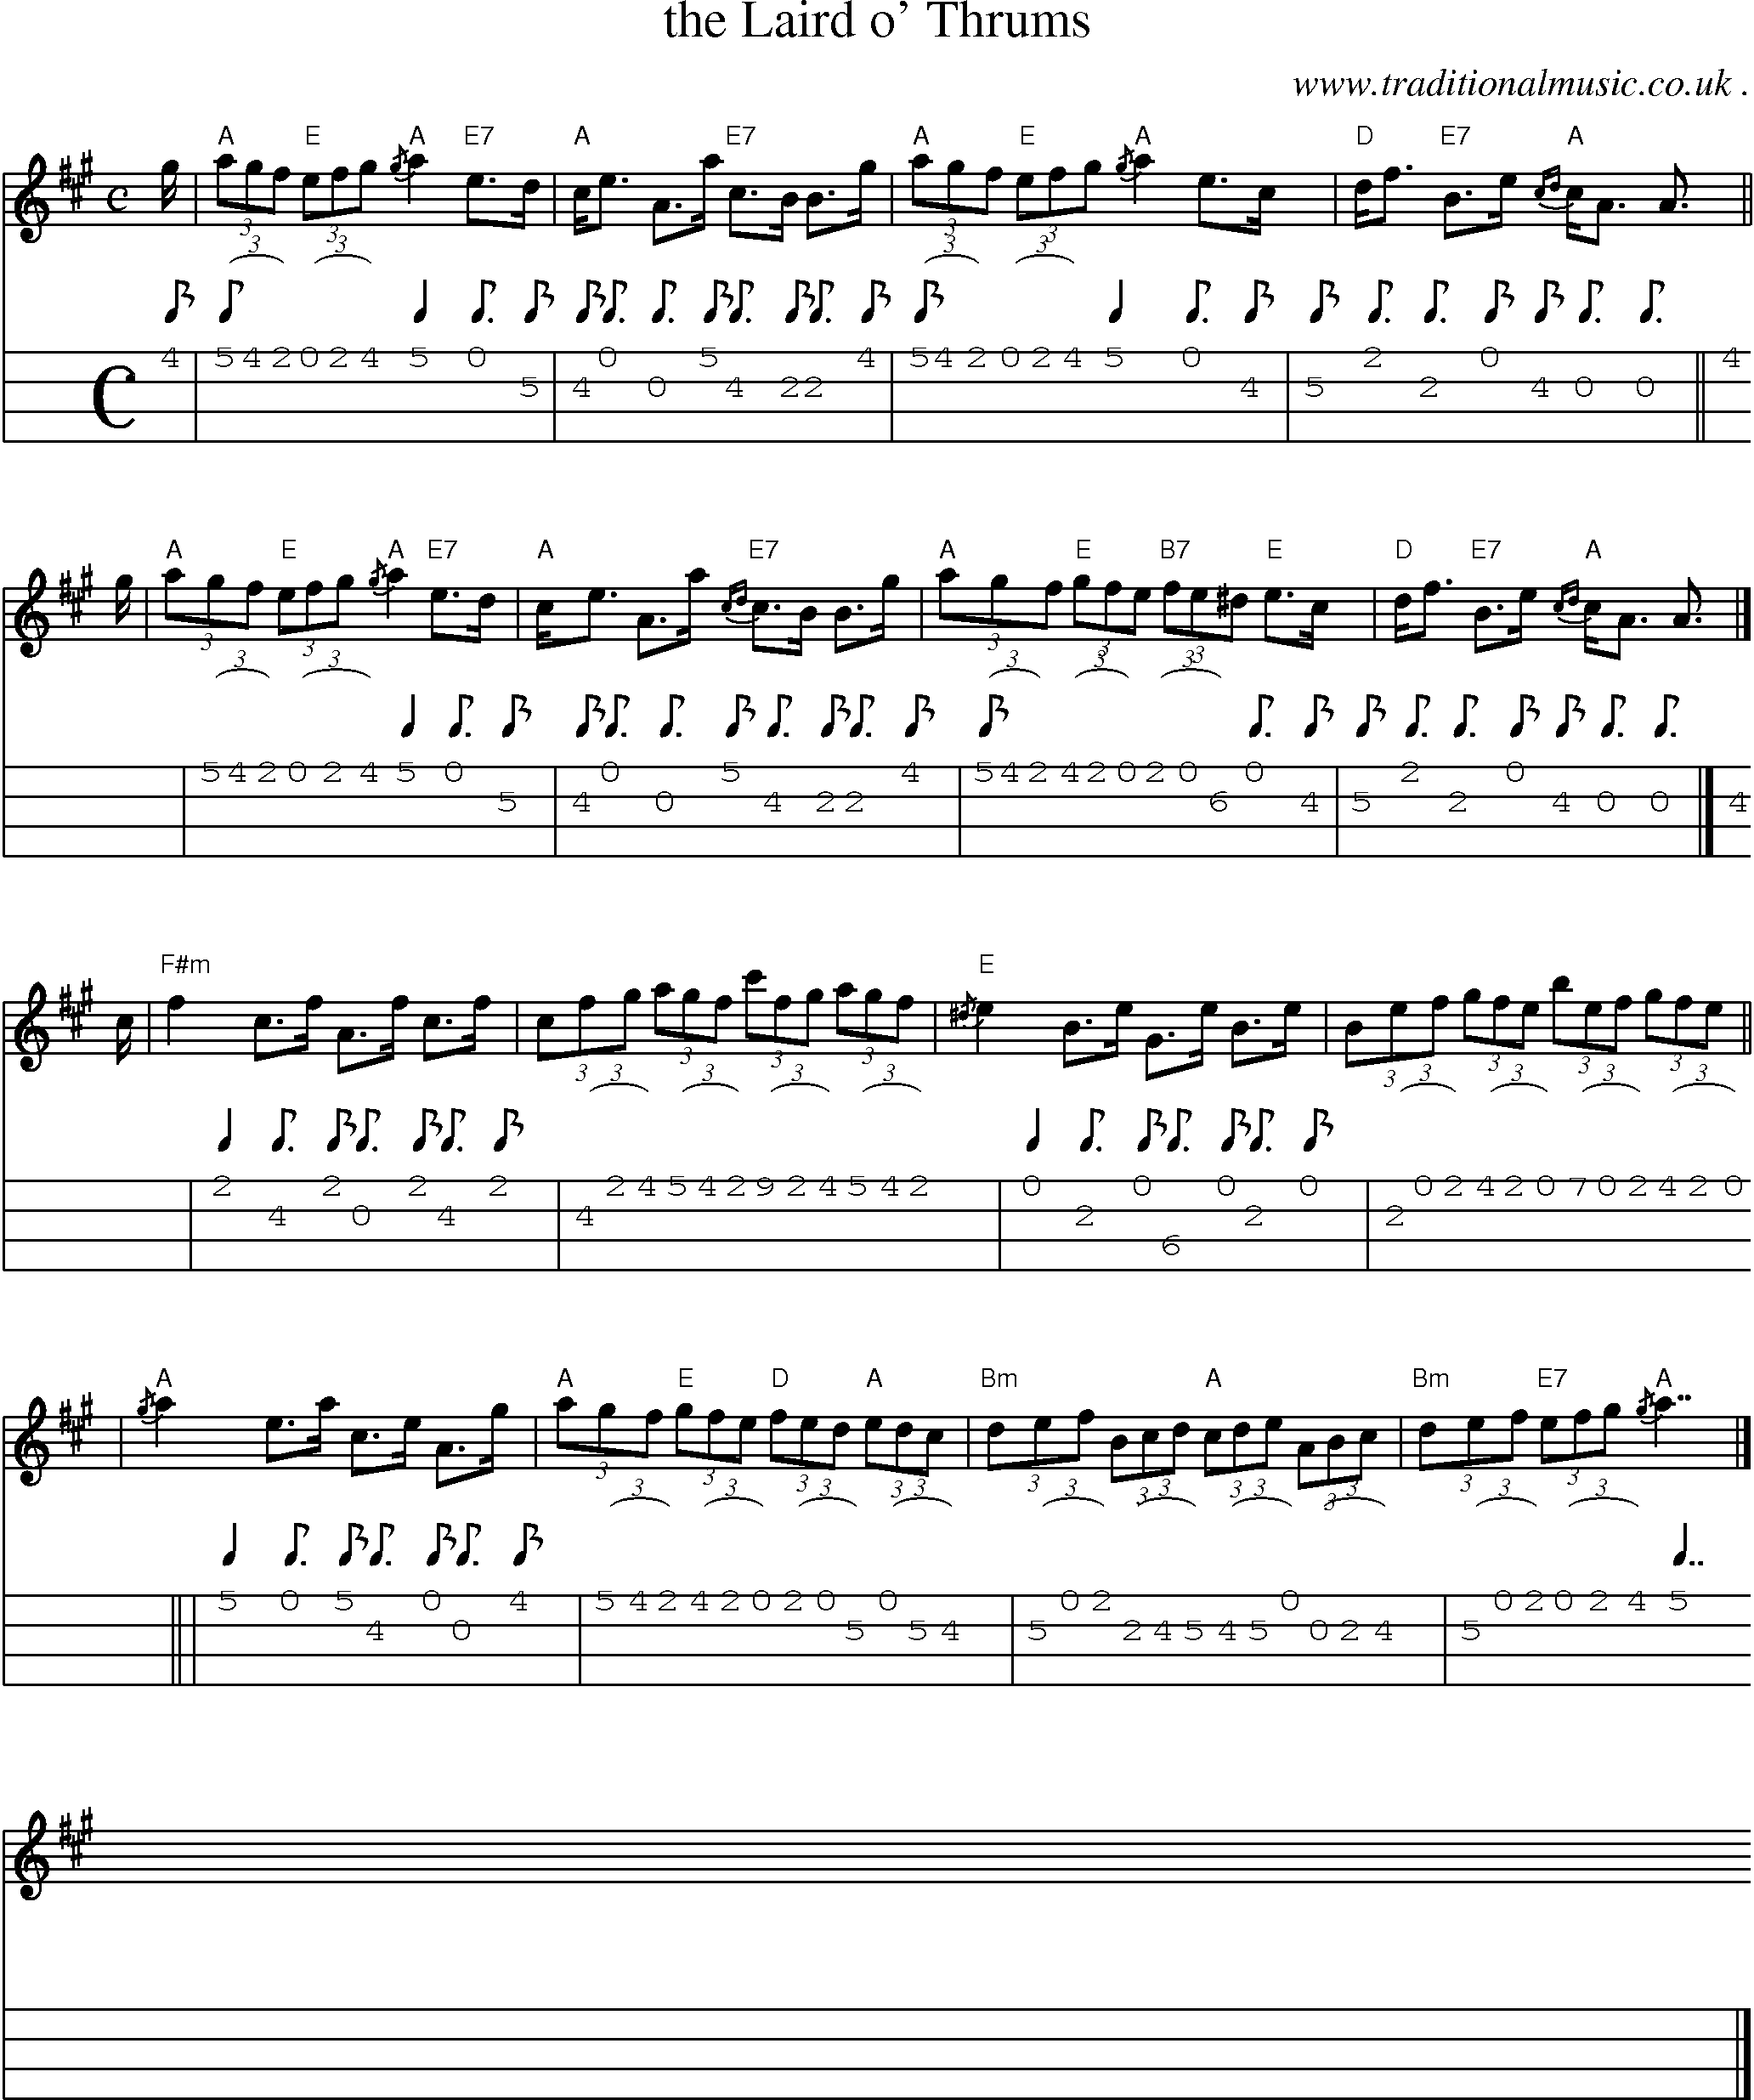 Sheet-music  score, Chords and Mandolin Tabs for The Laird O Thrums